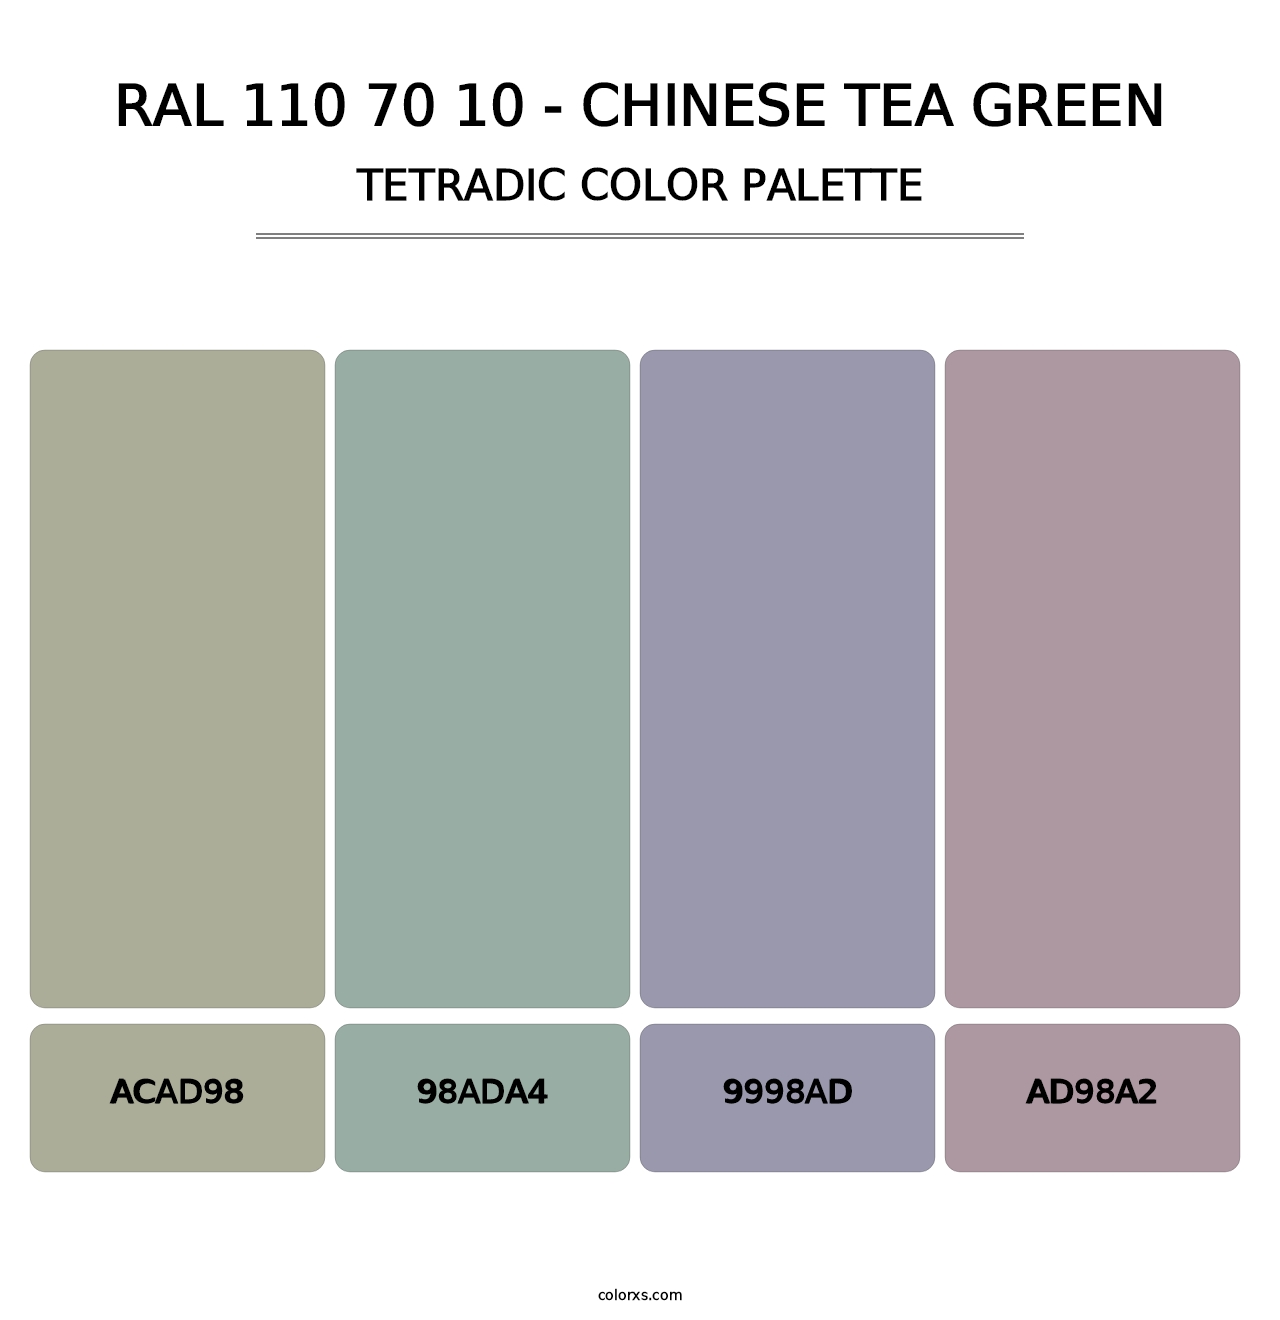 RAL 110 70 10 - Chinese Tea Green - Tetradic Color Palette